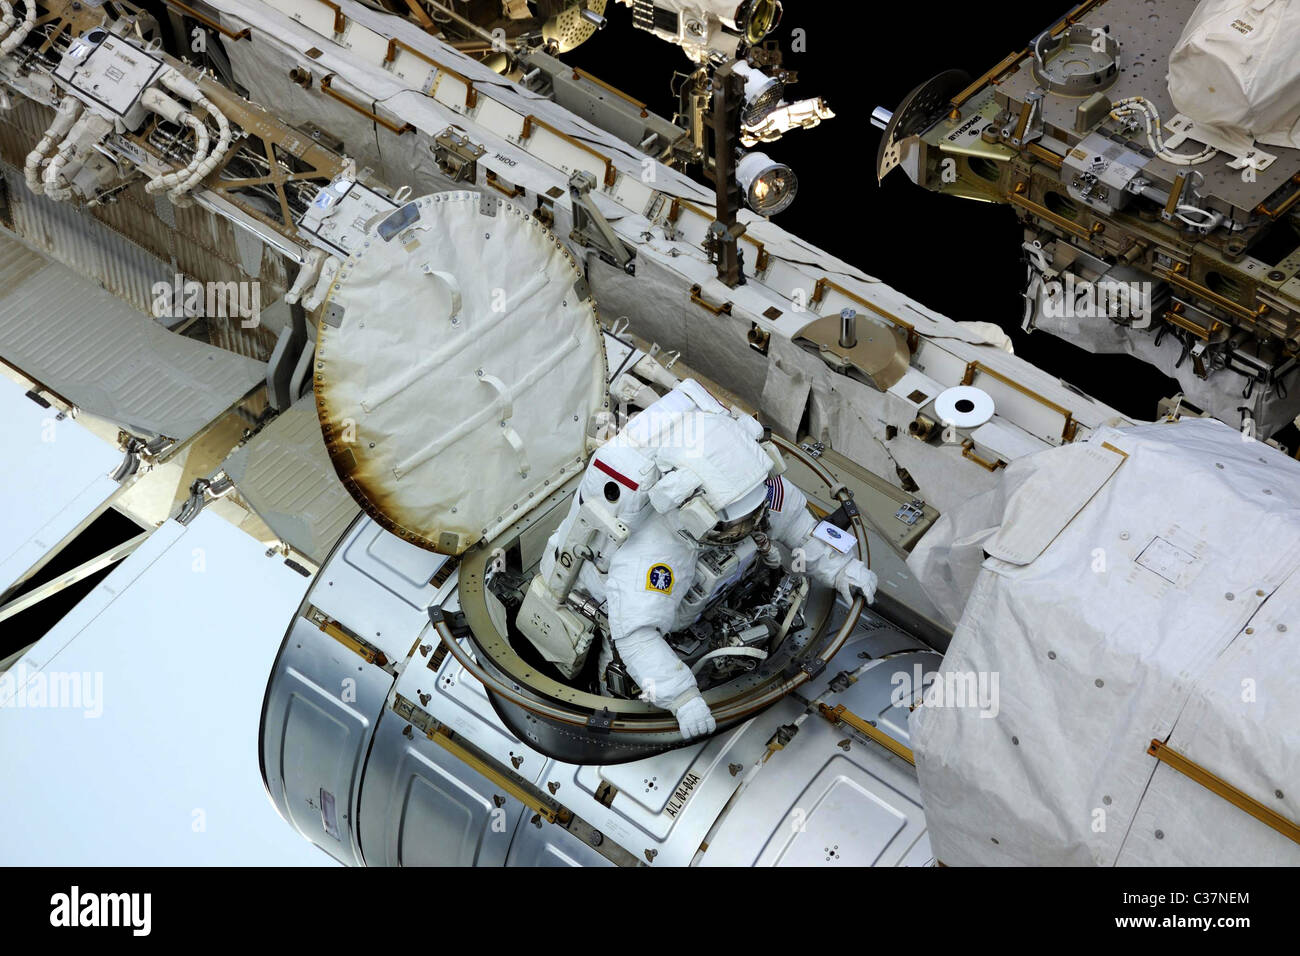 Astronaut Doug Wheelock emerges from the craft into the daylight on the Expedition 24 mission's second spacewalk. Stock Photo